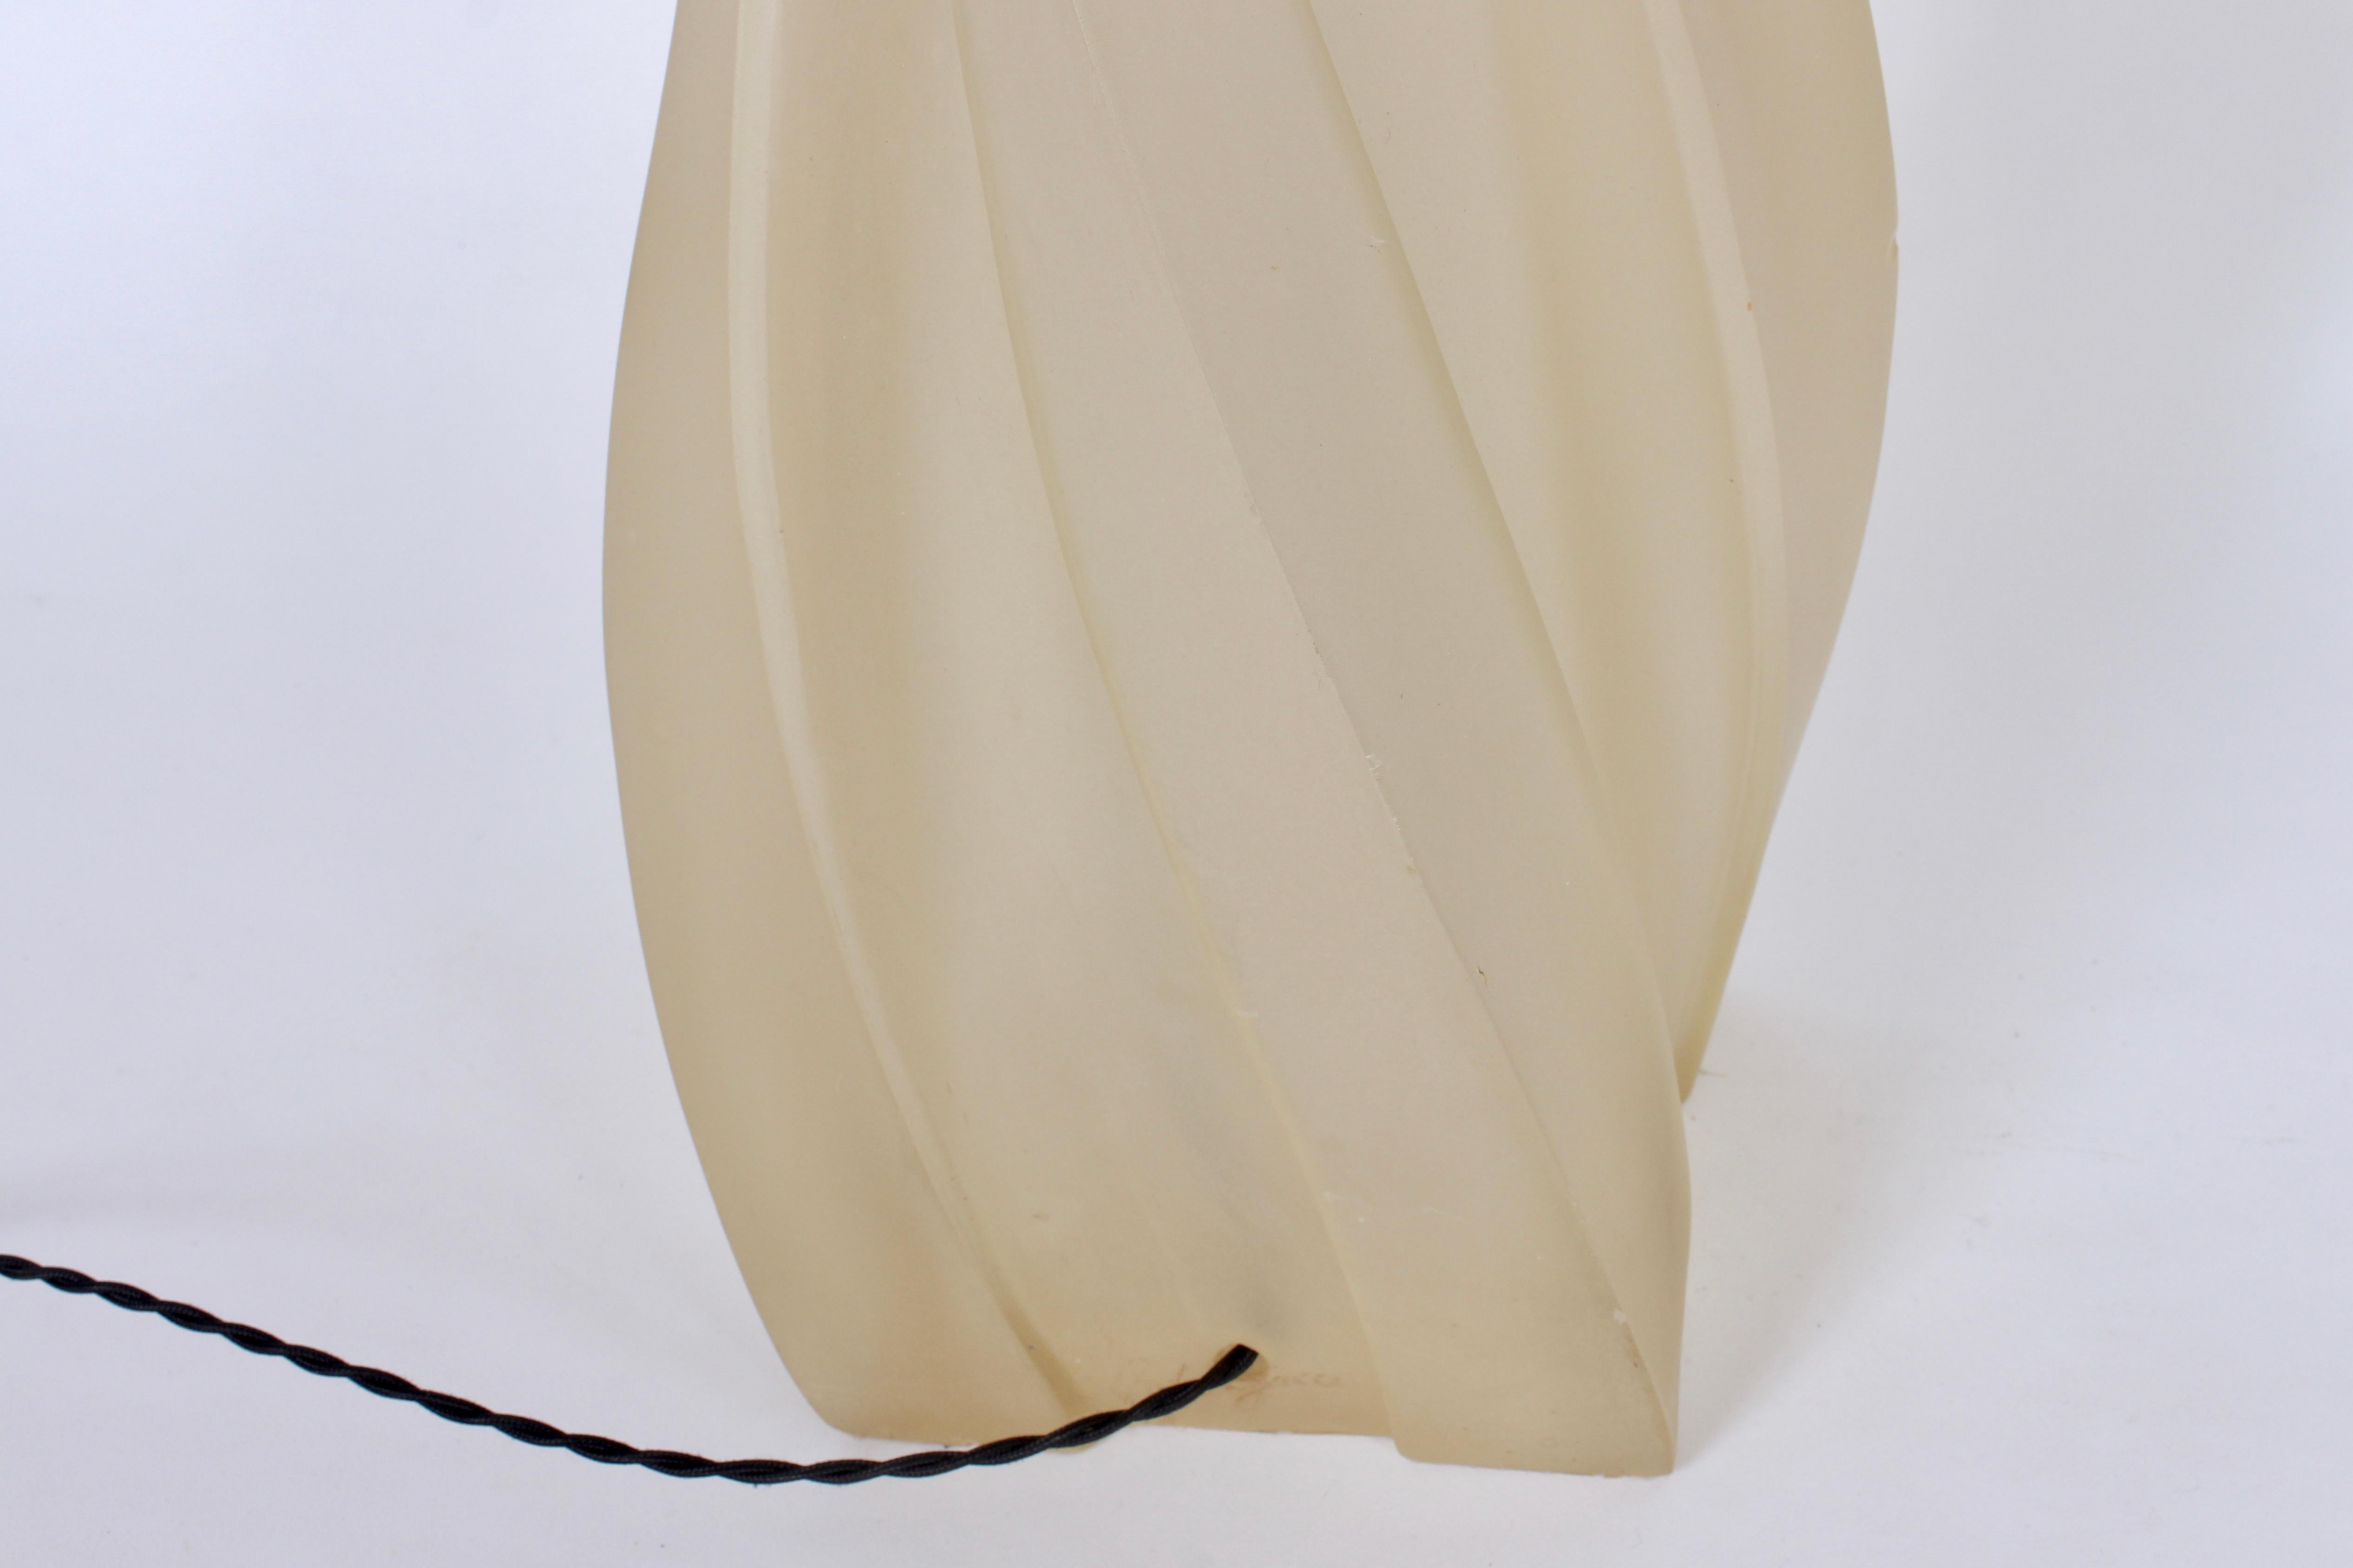 Paolo Gucci Organic Modern Translucent Cream Cast Resin Table Lamp, 1970's For Sale 1